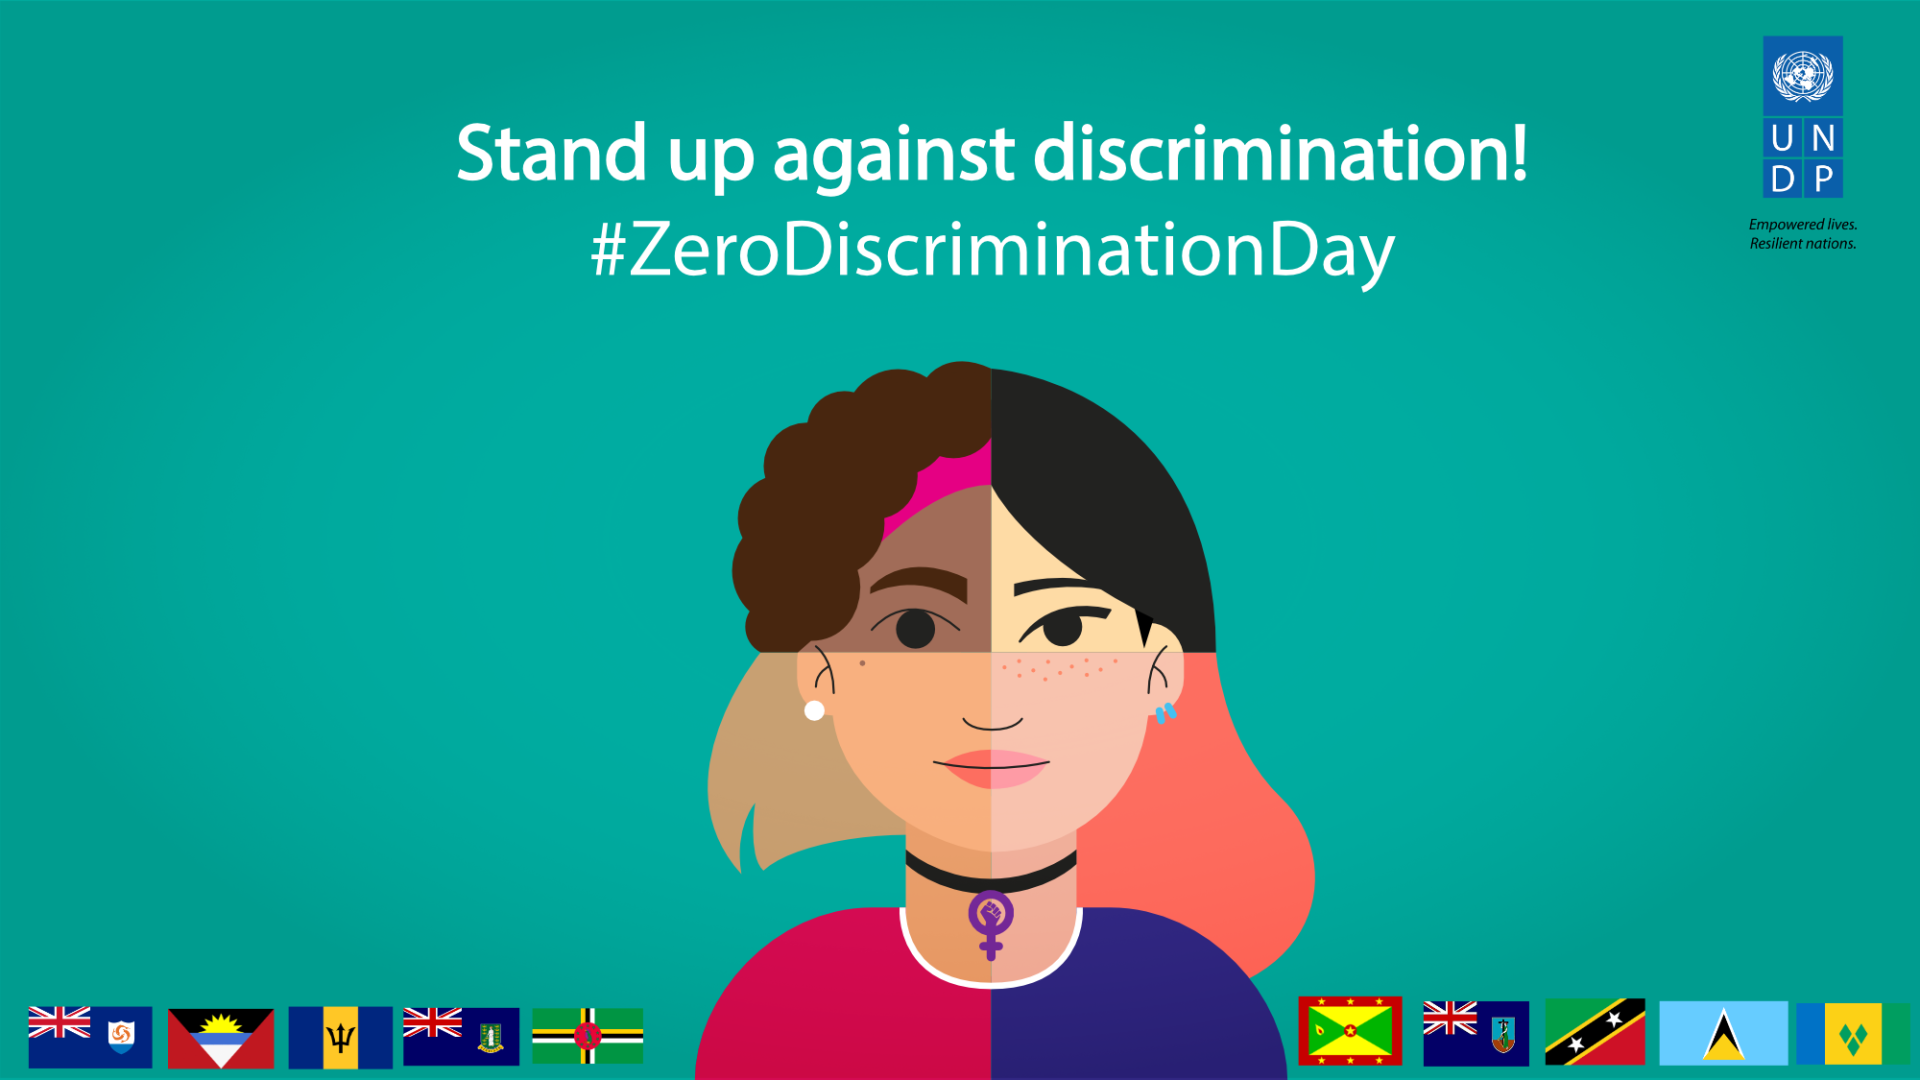 The Fight Against Discrimination | United Nations Development Programme